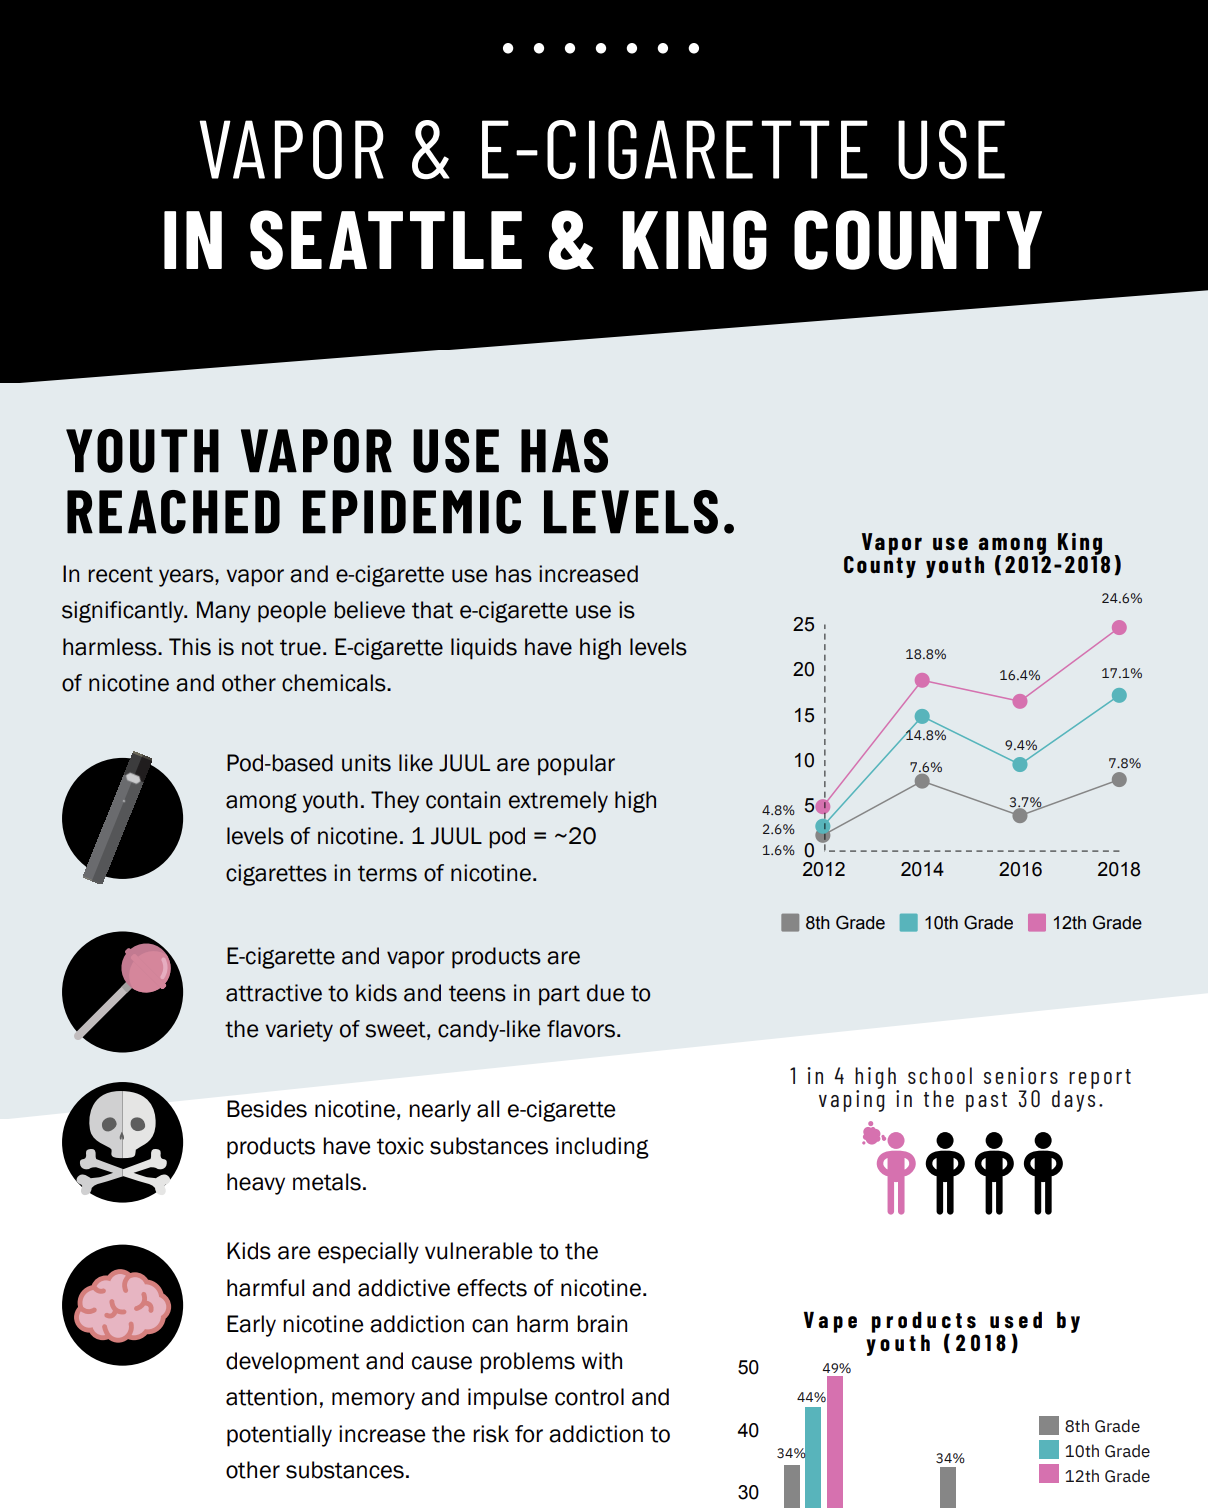 Thumbnail image of vapor and e-cigarette use infographic